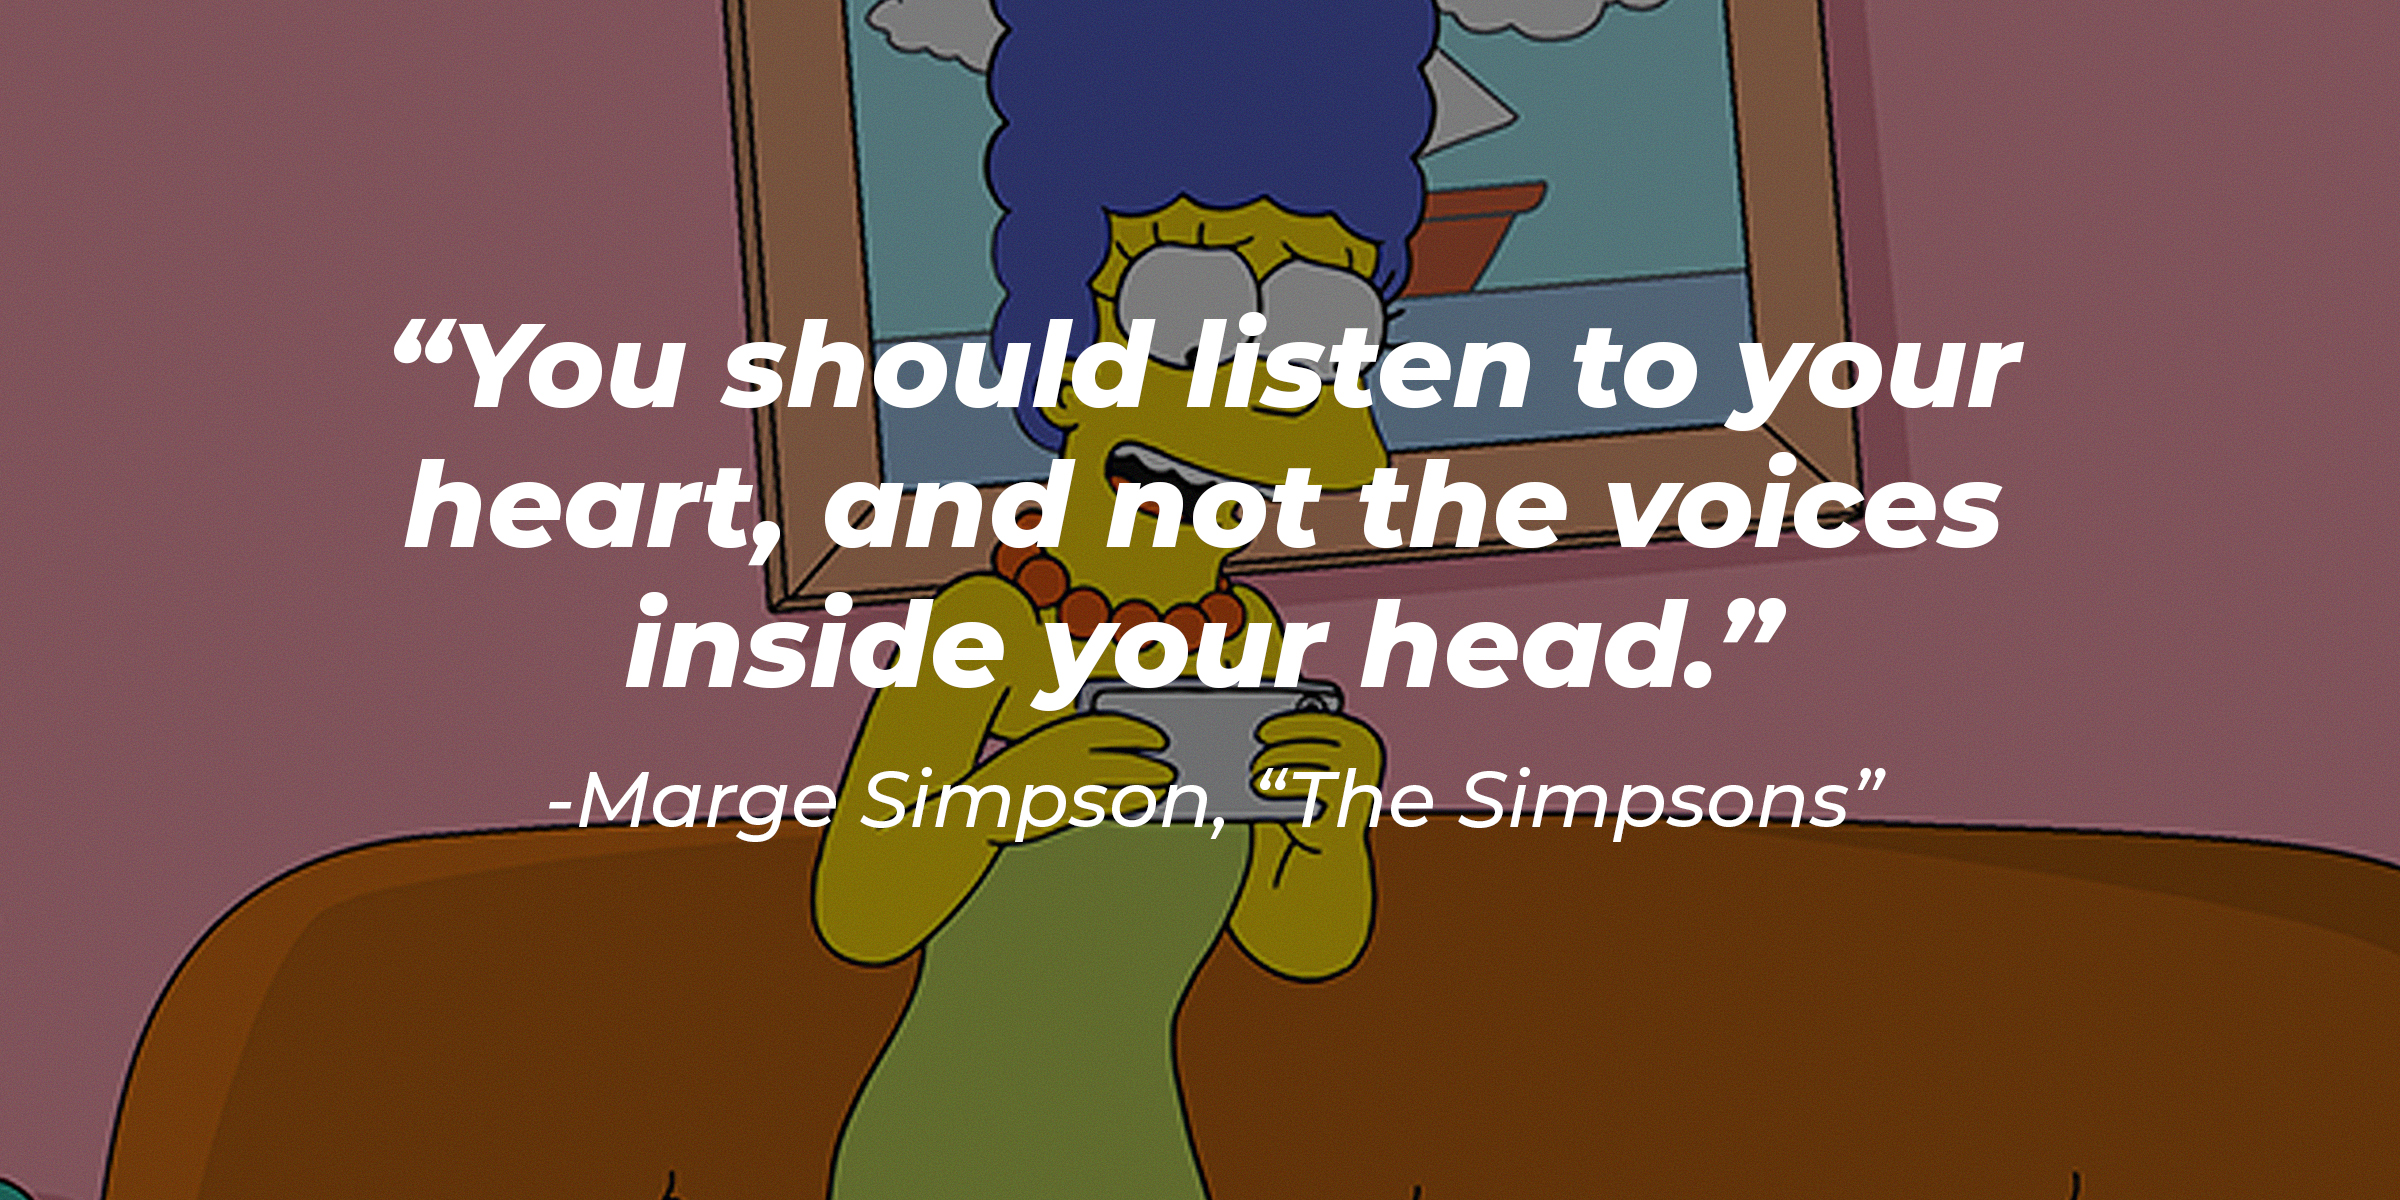 Marge Simpson's quote: "You should listen to your heart, and not the voices inside your head." | Image: facebook.com/TheSimpsons